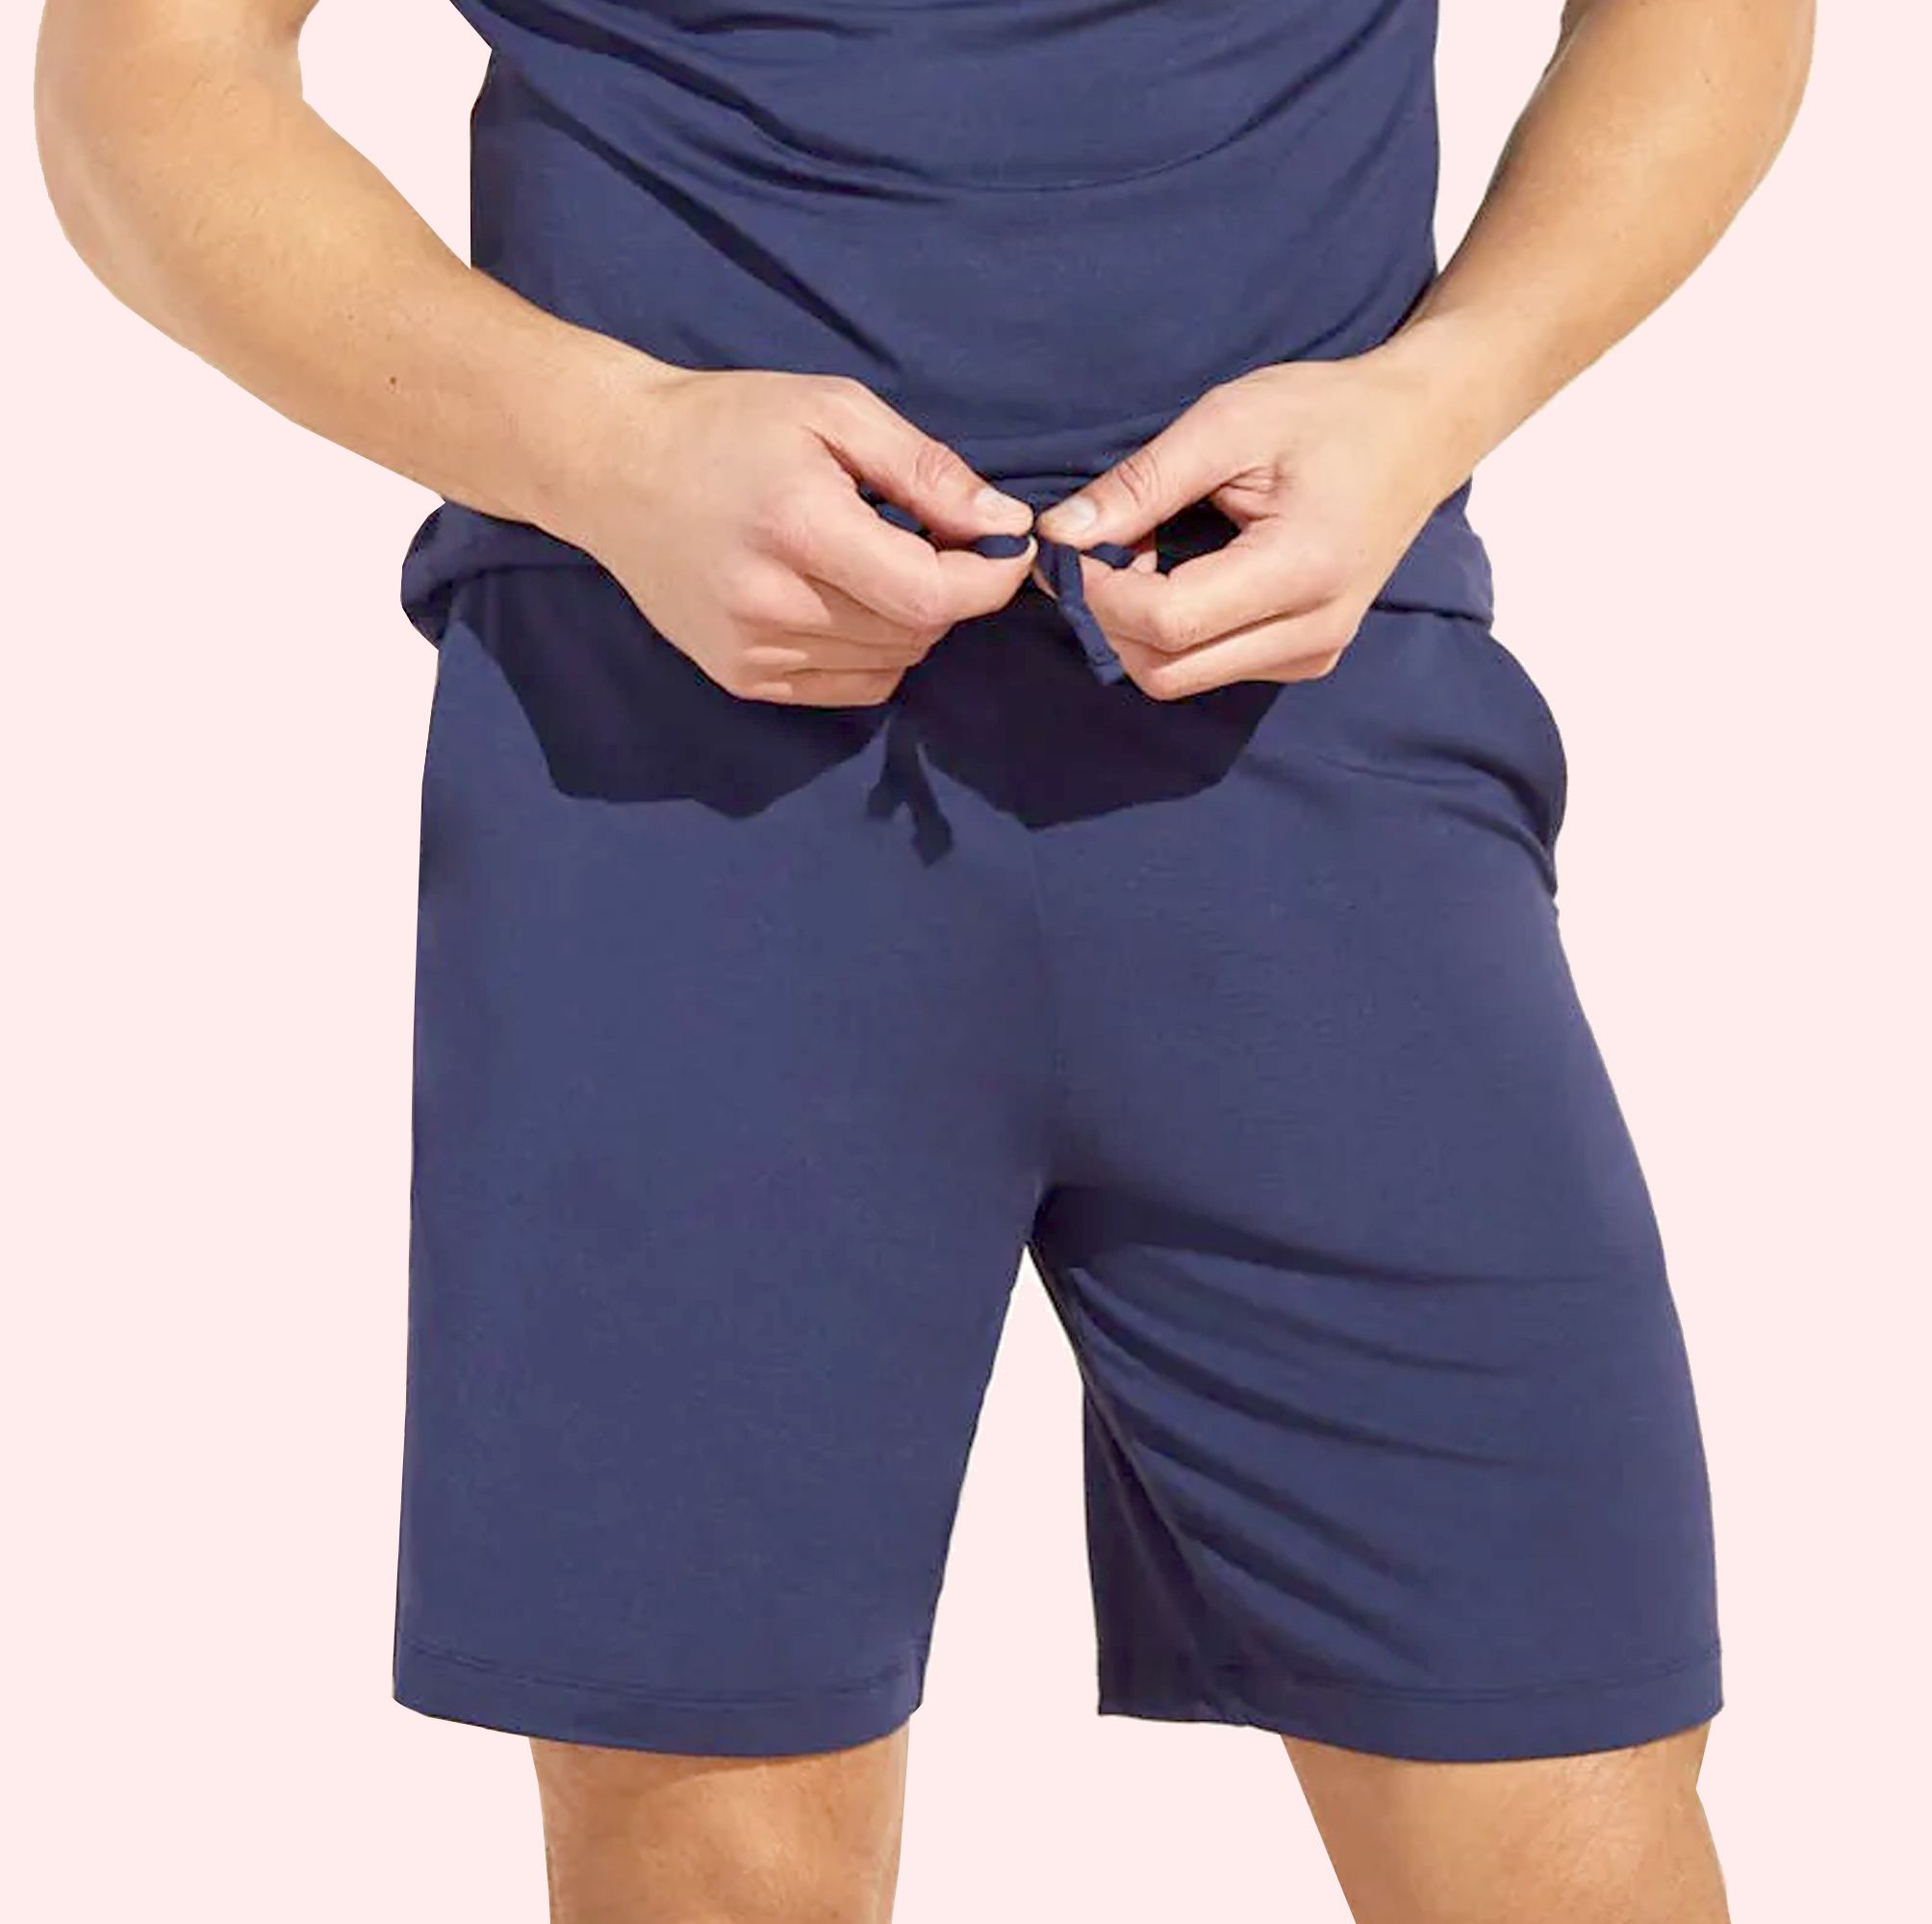 The 15 Best Men's Pajama Shorts for Sleeping, Lounging, and Taking It Easy